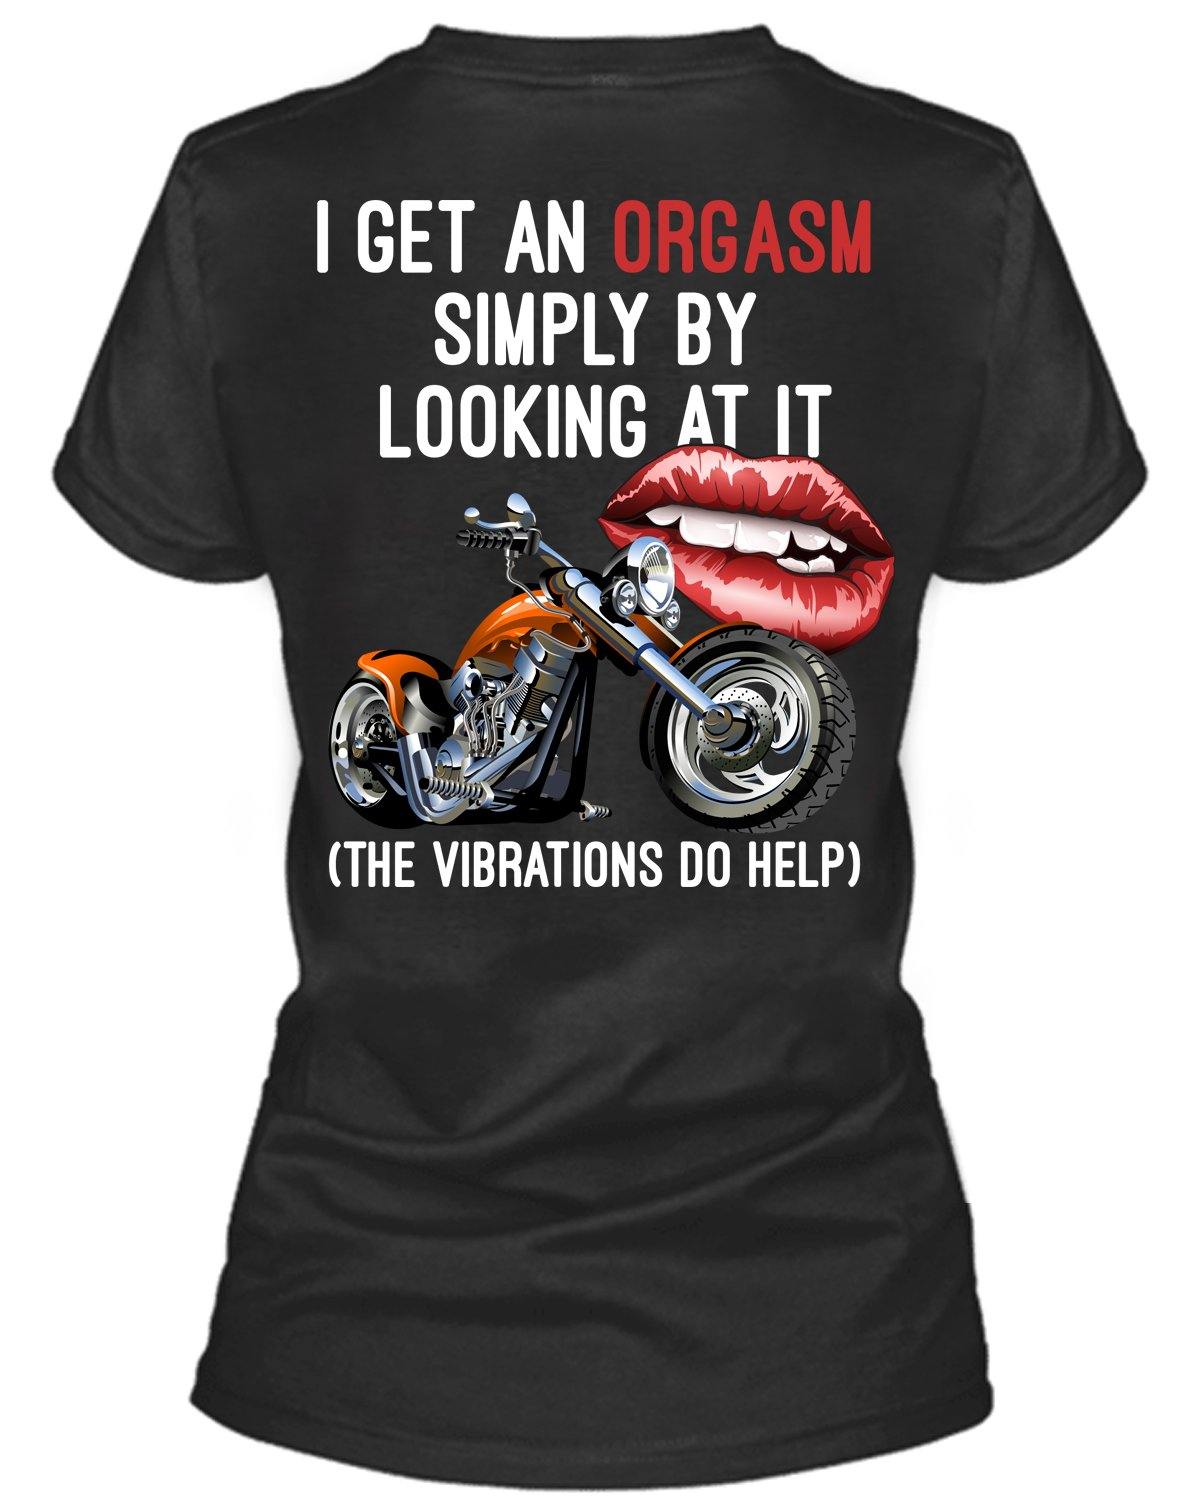 I Get An Orgasm Simply By Looking At It, The Vibrations Do Help T-Shirt - American Legend Rider